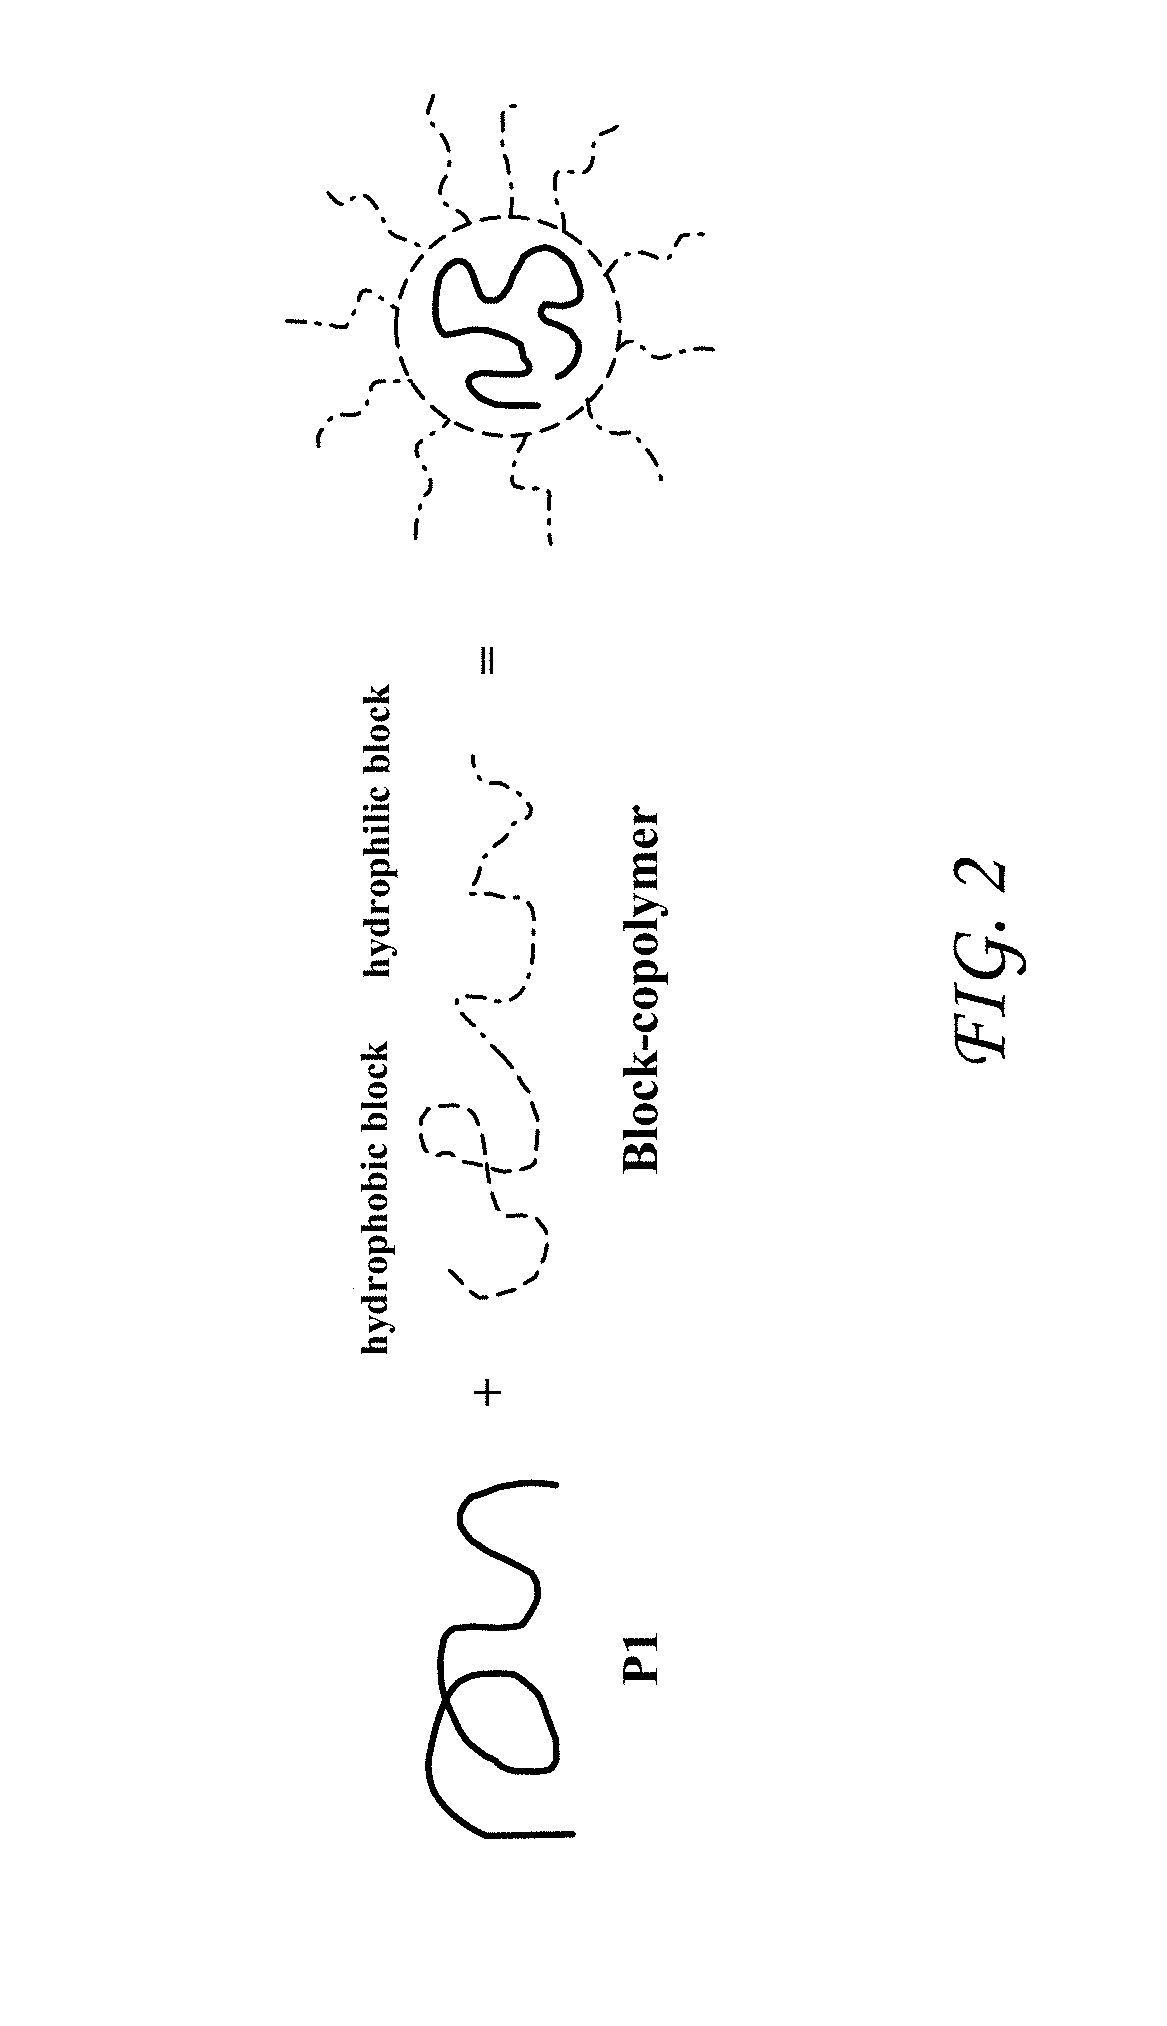 Self-assembly method for core/shell nanoparticles with enhanced emission